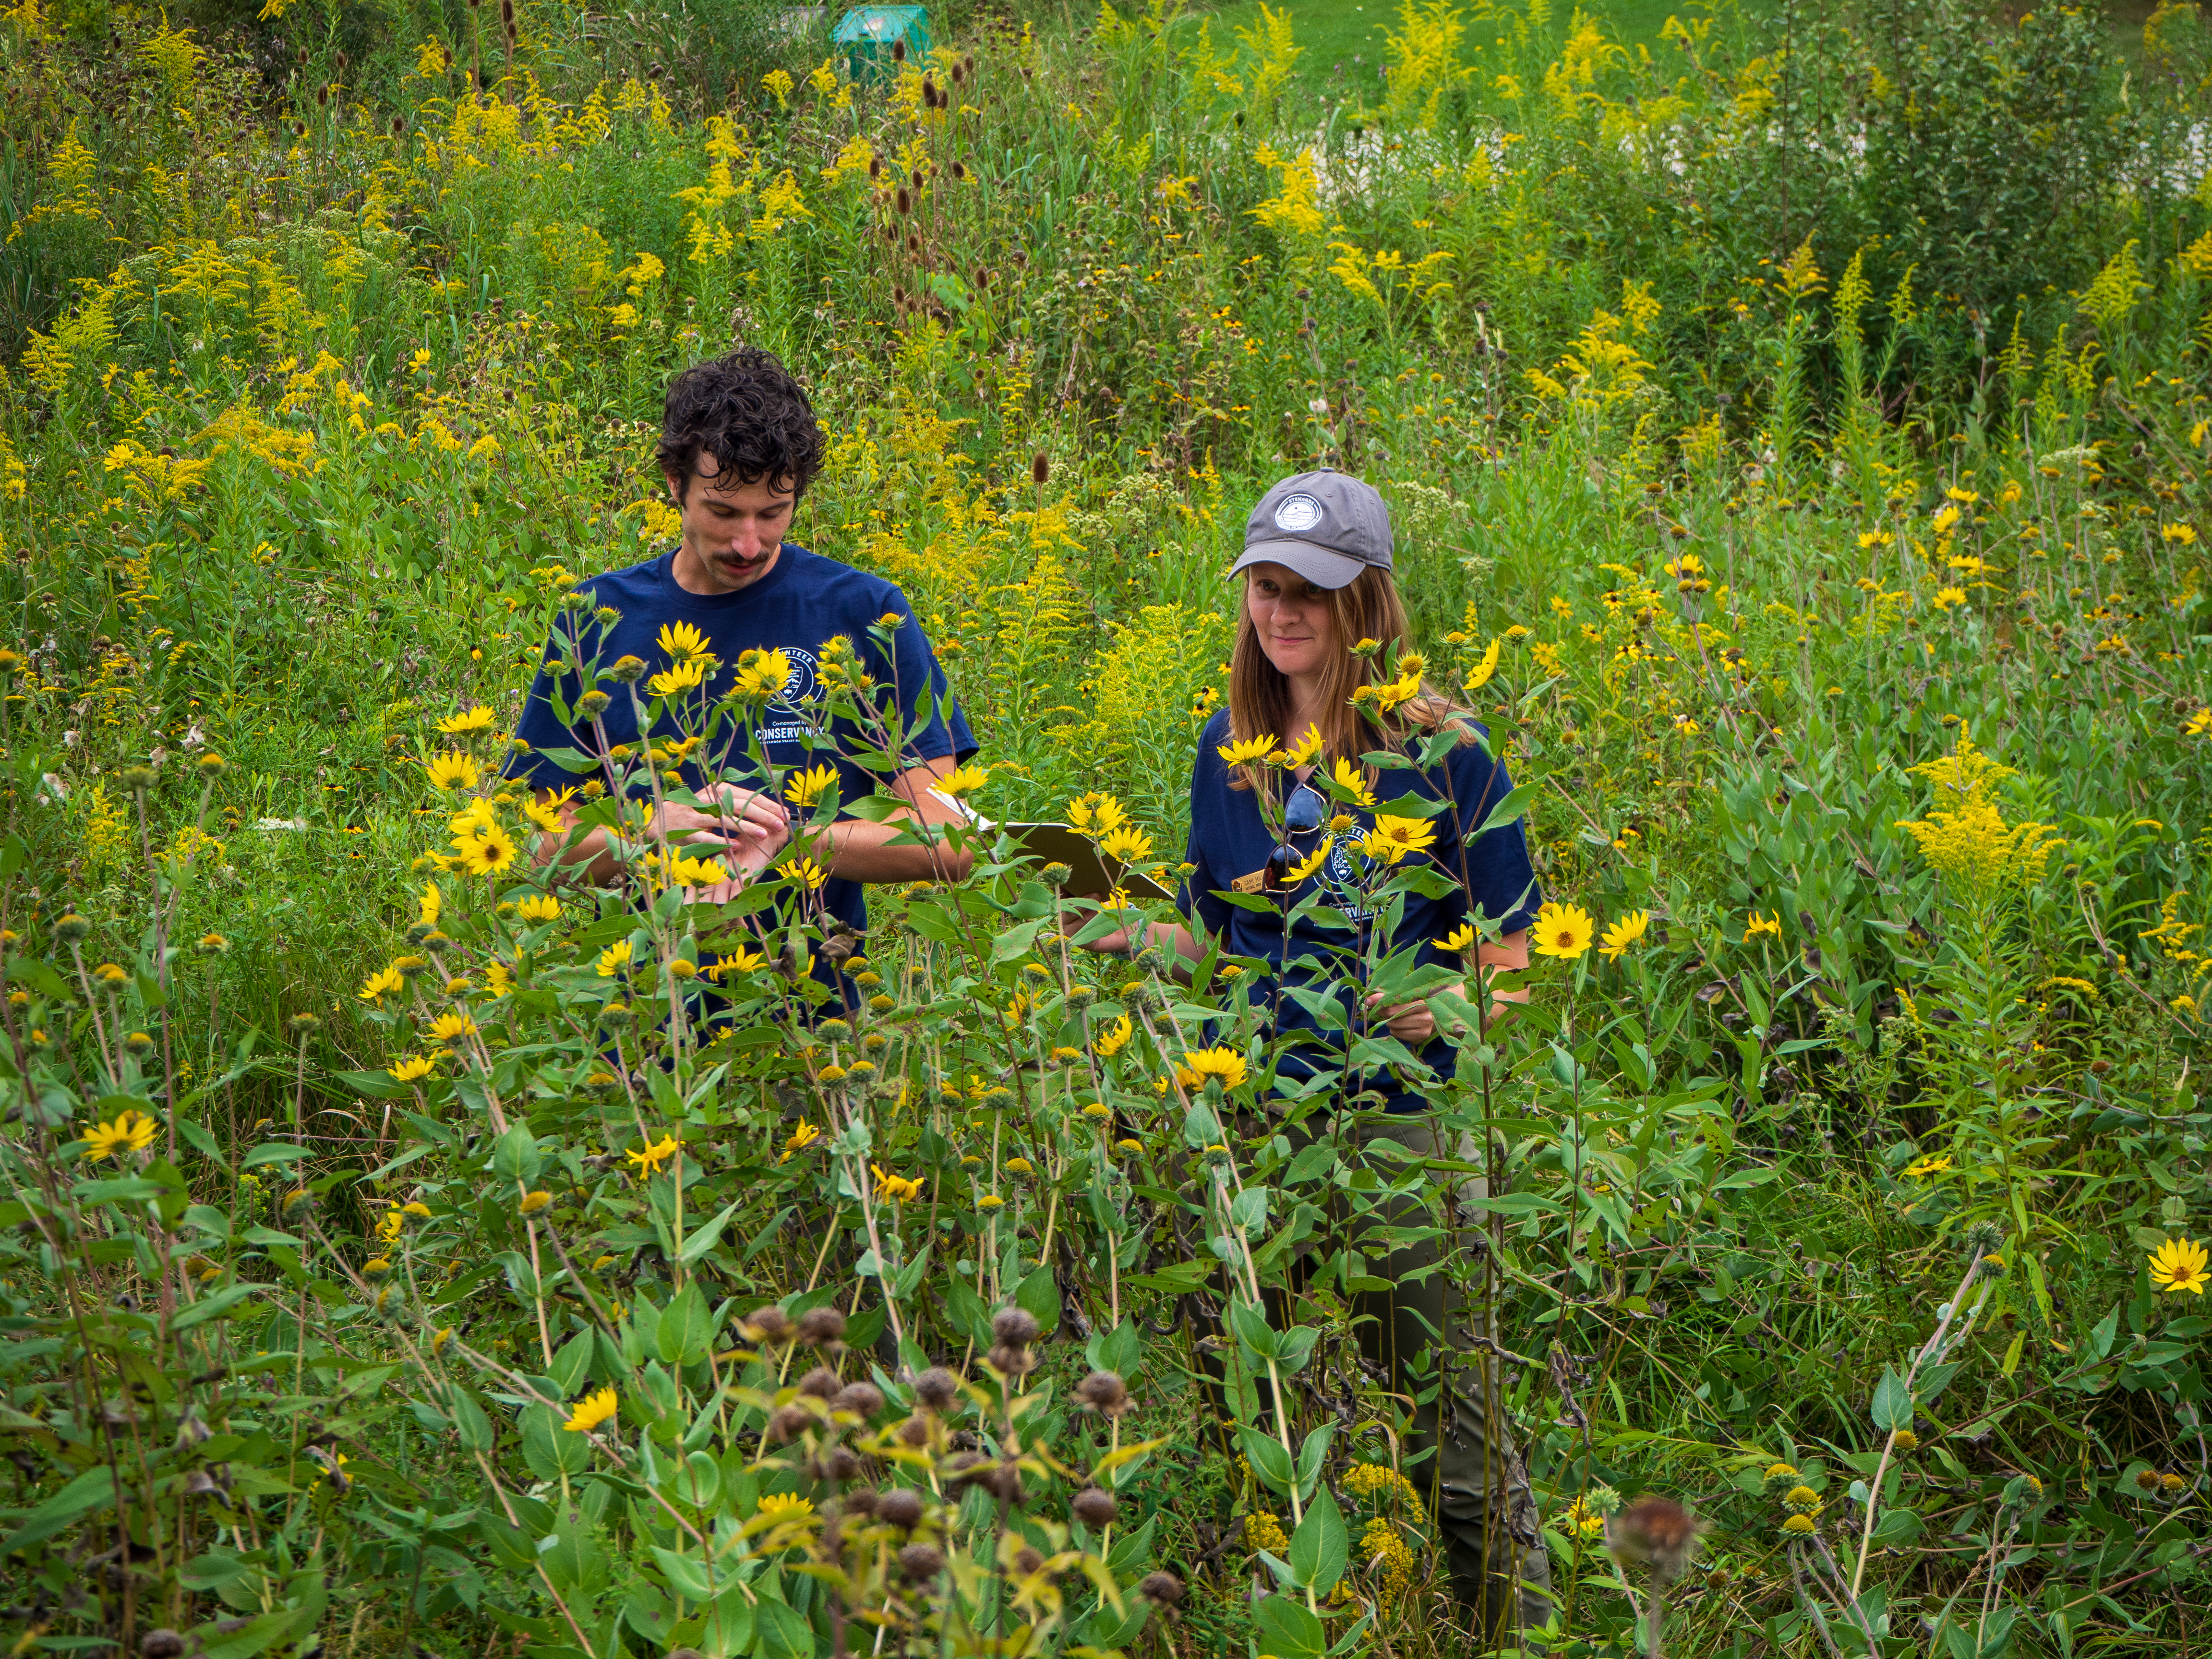 A photo of Cameron, Community Volunteer Ambassador from Cuyahoga Valley National Historical Park, and another person conducting a Citizen Science event in a field of yellow flowers.